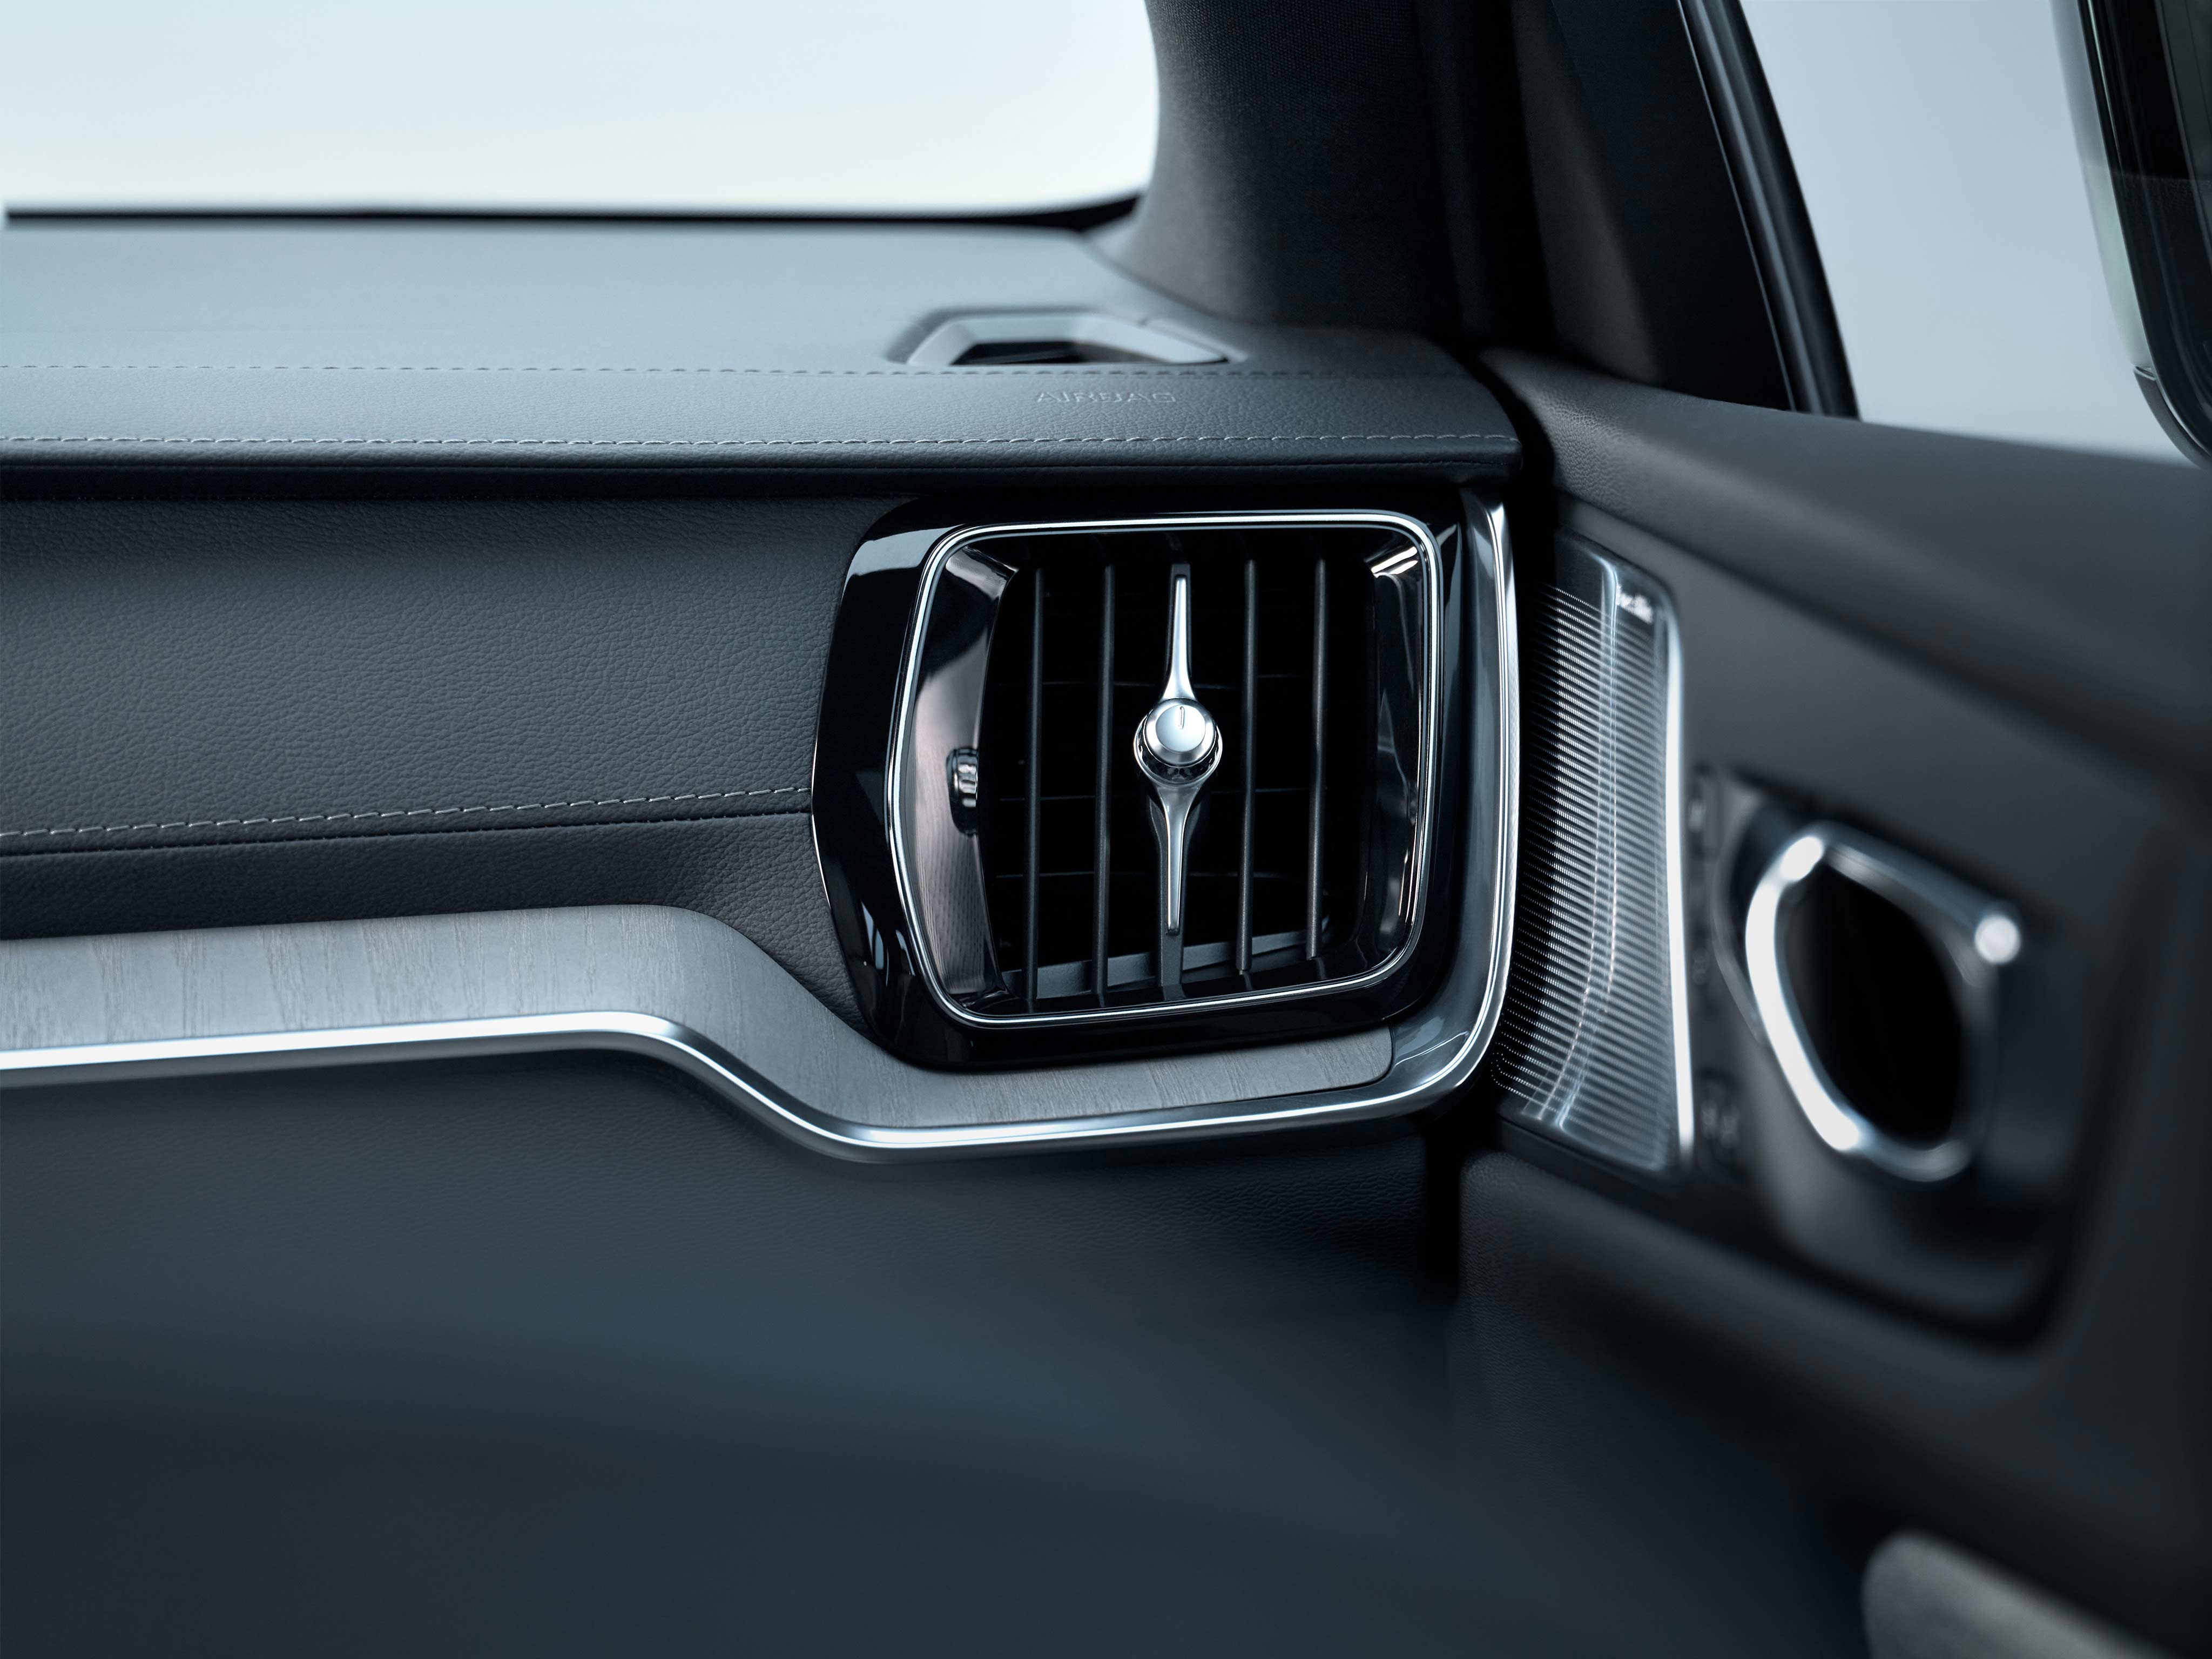 Detail of an air vent in Volvo interior.